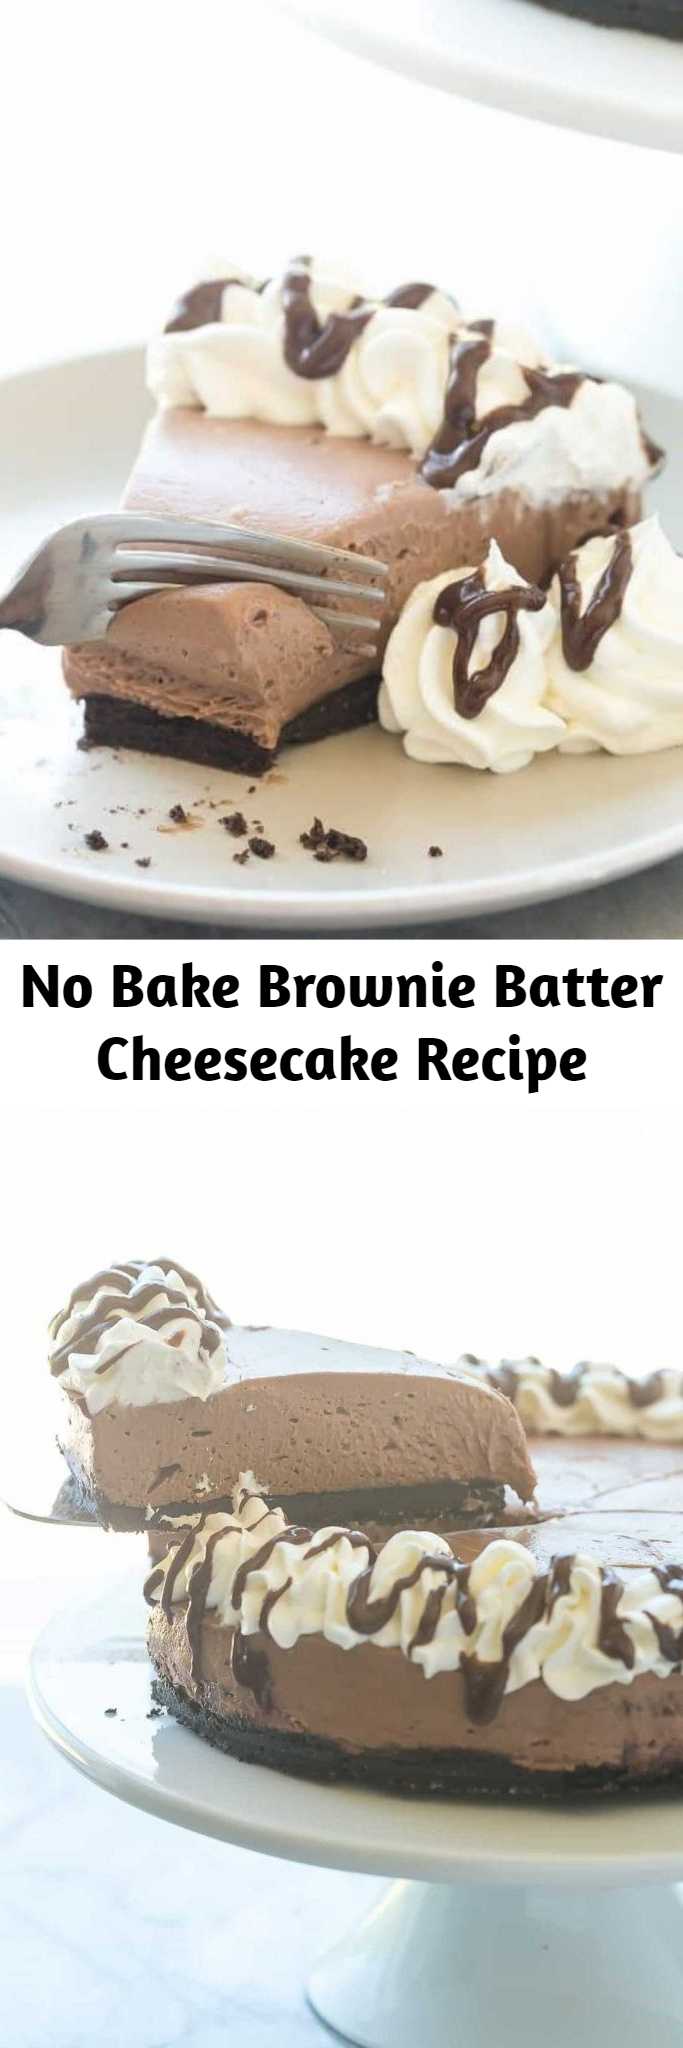 No Bake Brownie Batter Cheesecake Recipe - This No Bake Brownie Batter Cheesecake is the cheesecake for chocolate lovers! It's rich and fudgy with no oven required!